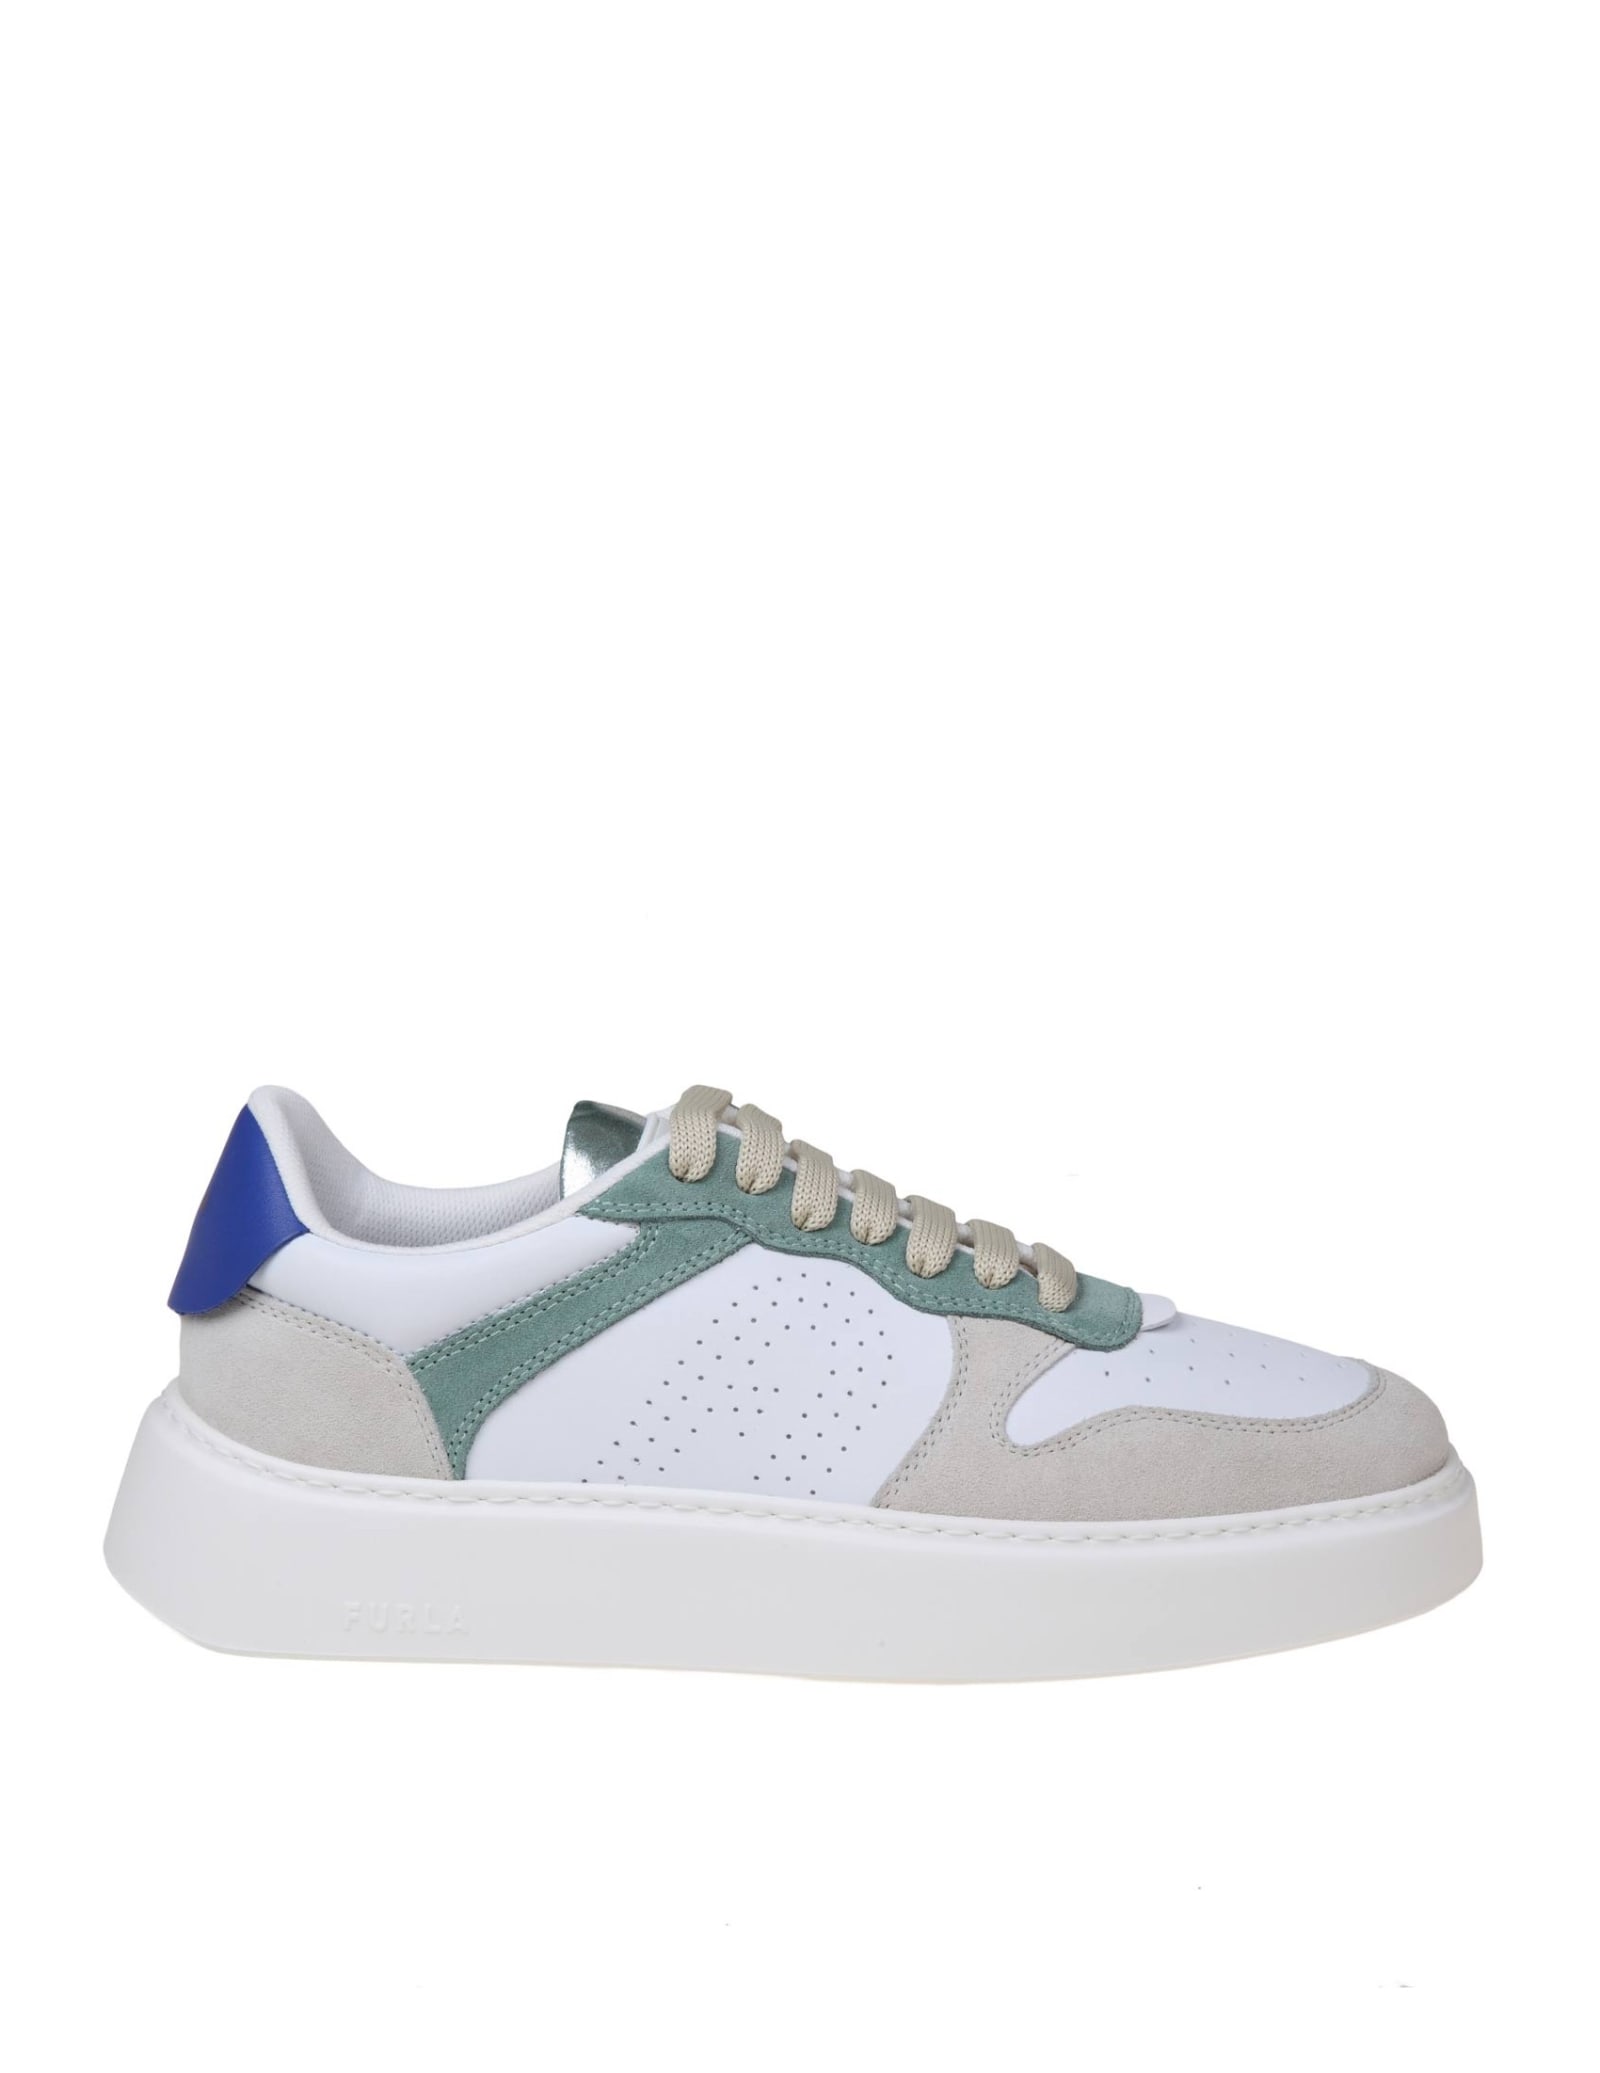 FURLA SNEAKER BASIC MODEL IN MULTICOLORED SYNTHETIC LEATHER